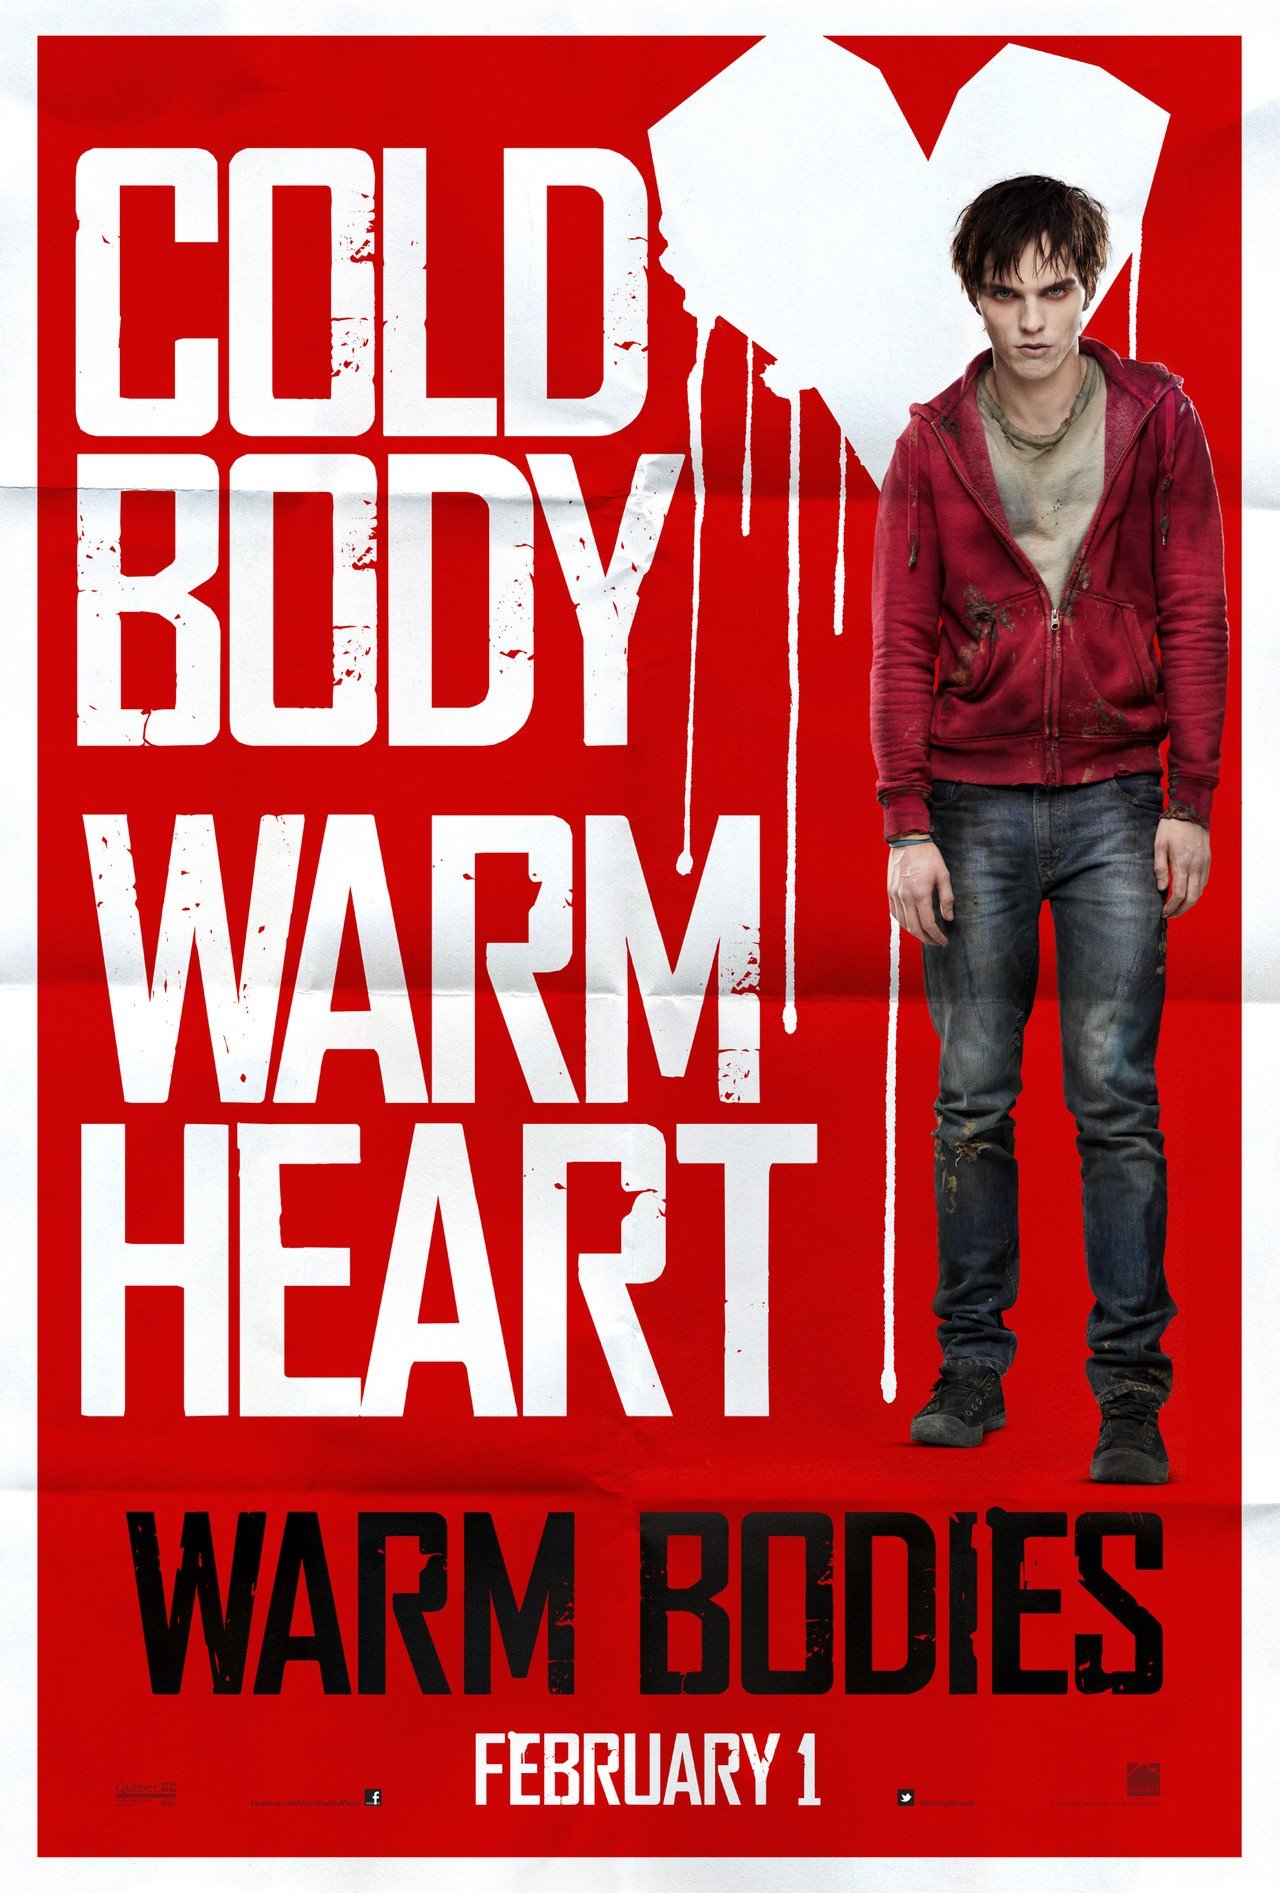 Poster of Summit Entertainment's Warm Bodies (2013)